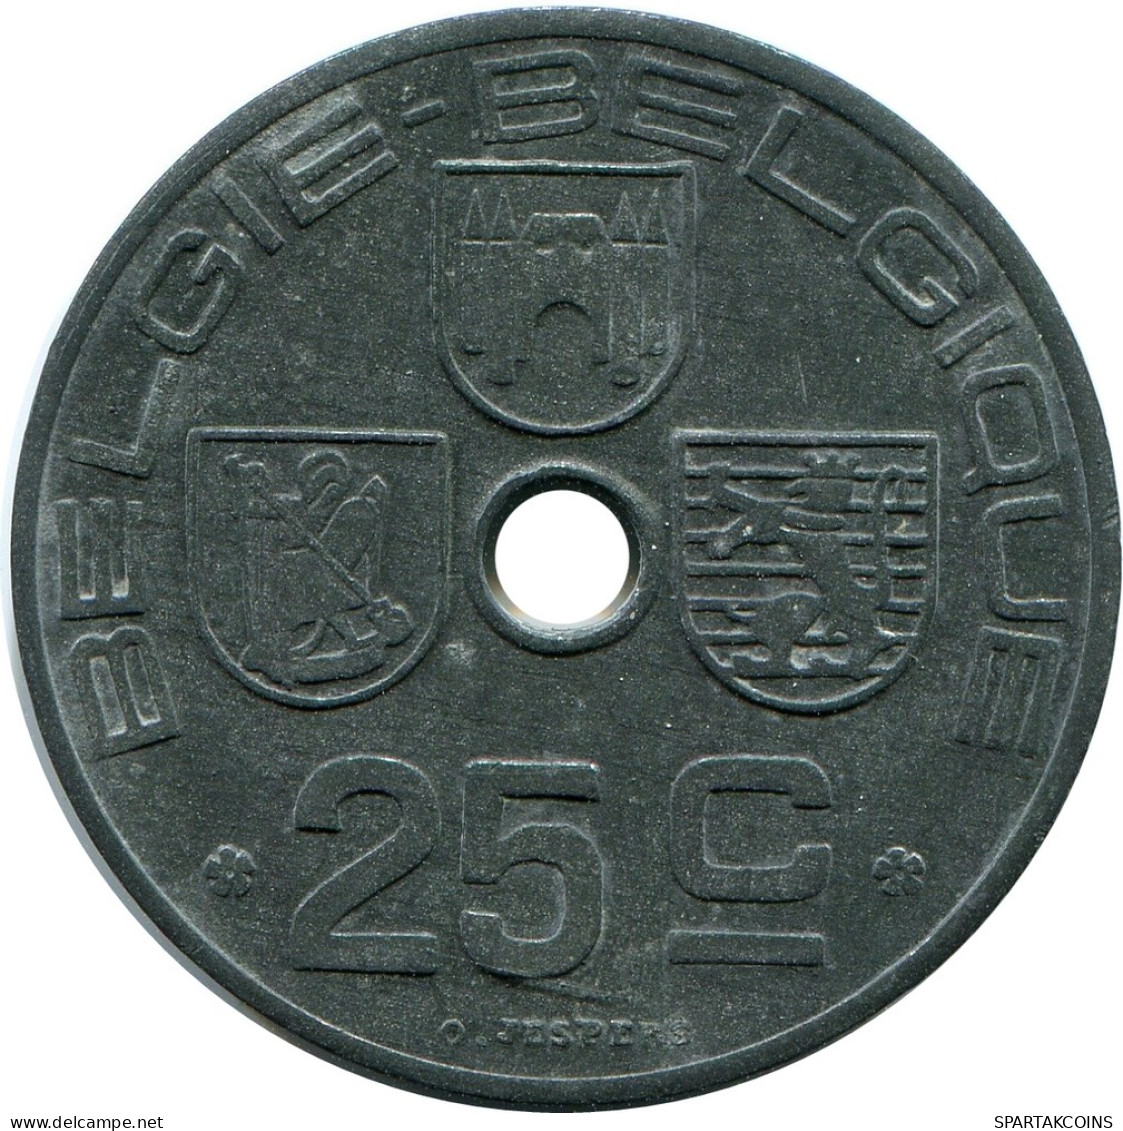 25 CENTIMES 1943 FRENCH Text BELGIUM Coin #BA424.U - 25 Cents